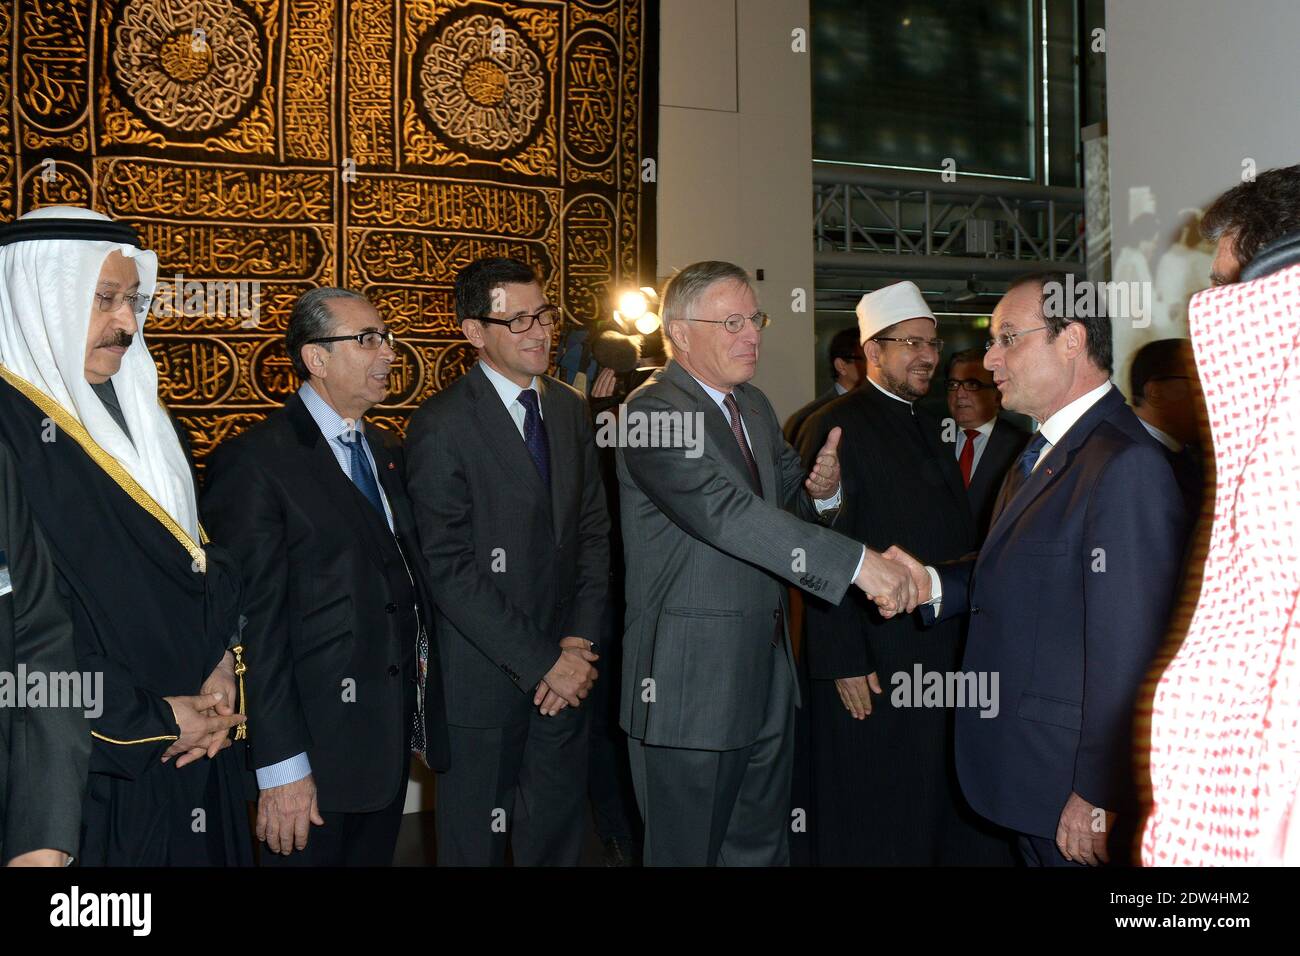 French president Francois Hollande (right) seen with Total Honorary Chairman Thierry Desmarest as he inaugurates an exhibition about the 'hajj' or 'pilgrimage' at the Institut du Monde Arabe in Paris, France, on April 22, 2014. It will stay until the end of August 2014. Photo by Ammar Abd Rabbo/ABACAPRESS.COM Stock Photo